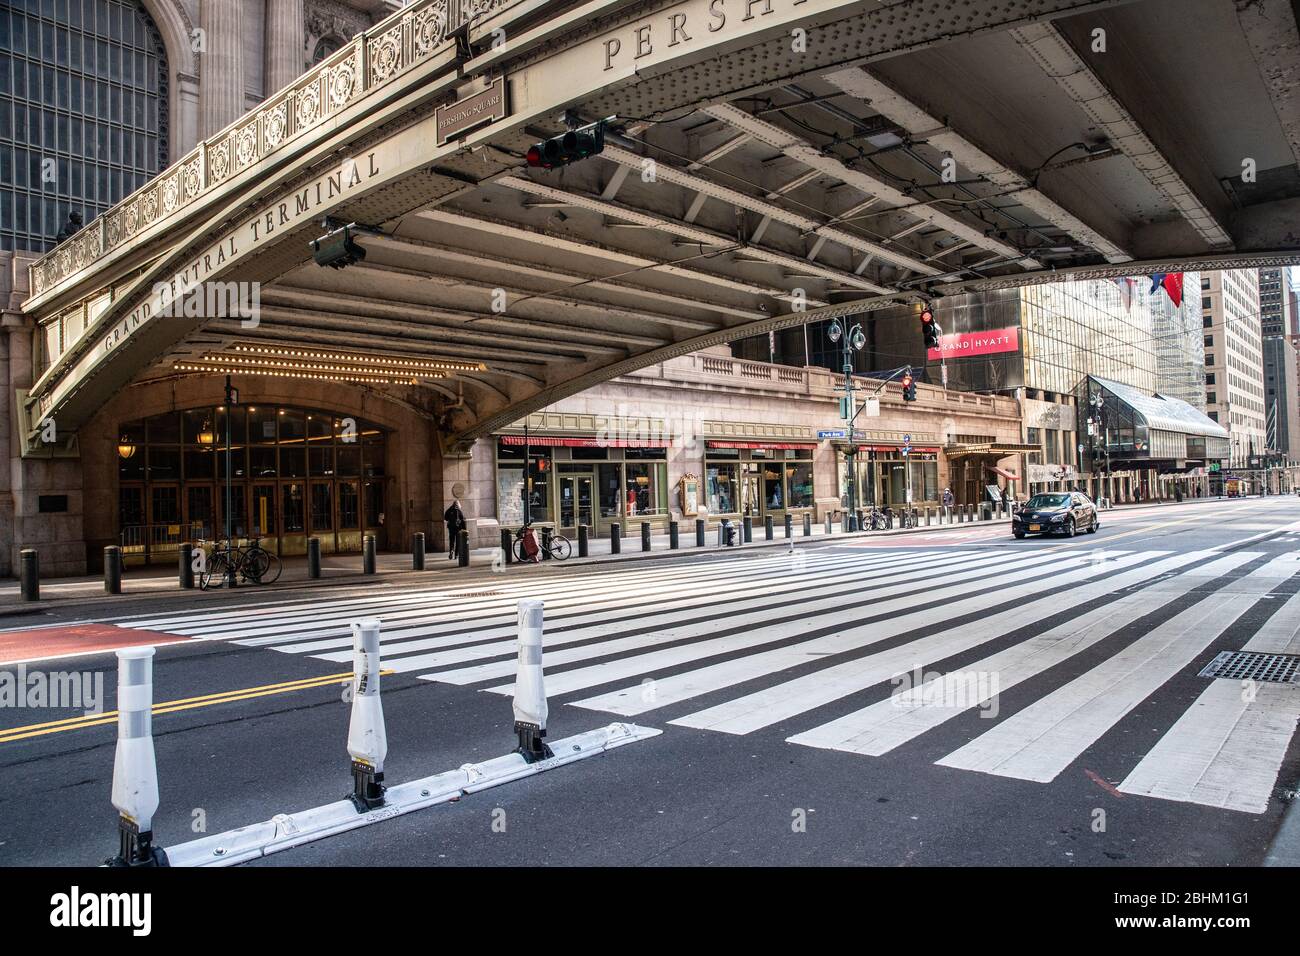 NEW YORK CITY - APRIL 19, 2020:  View of empty street at Grand Central Terminal in Manhattan during the Covid-19 Coronavirus pandemic lockdown. Stock Photo